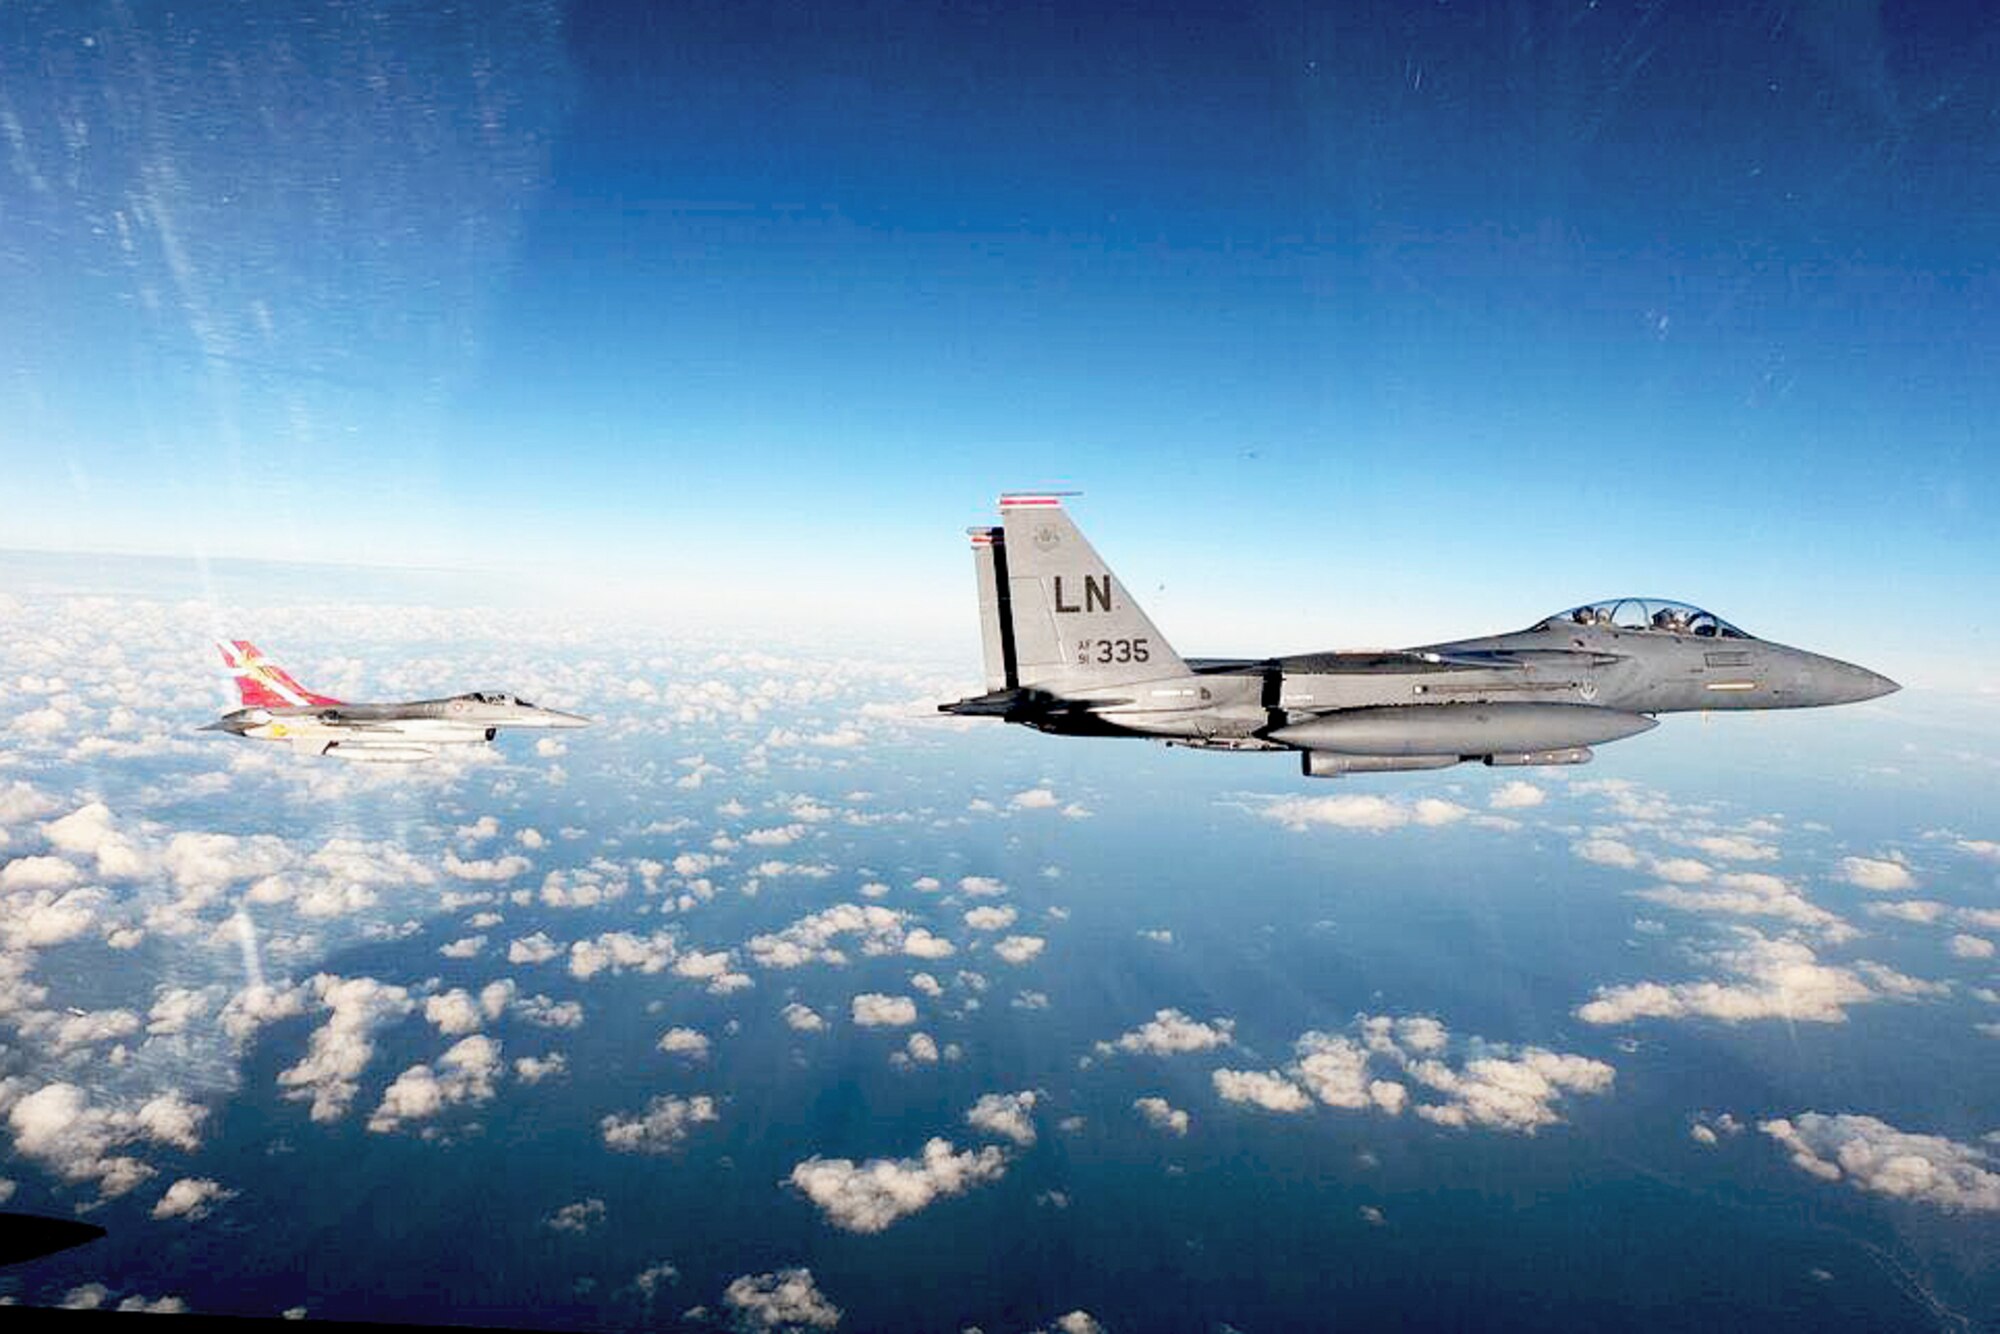 An F-15E Strike Eagle assigned to the 48th Fighter Wing flies in formation with an F-16 Fighting Falcon assigned to the Danish Special Operation Forces during a combined readiness exercise in the Baltic region, Nov 2, 2020. Exercises and engagements in the European area of responsibility demonstrate U.S. commitment to the security and stability in this region through operationalizing agility-based war-fighting concepts. (U.S. Air Force photo by Senior Airman Shanice Ship)